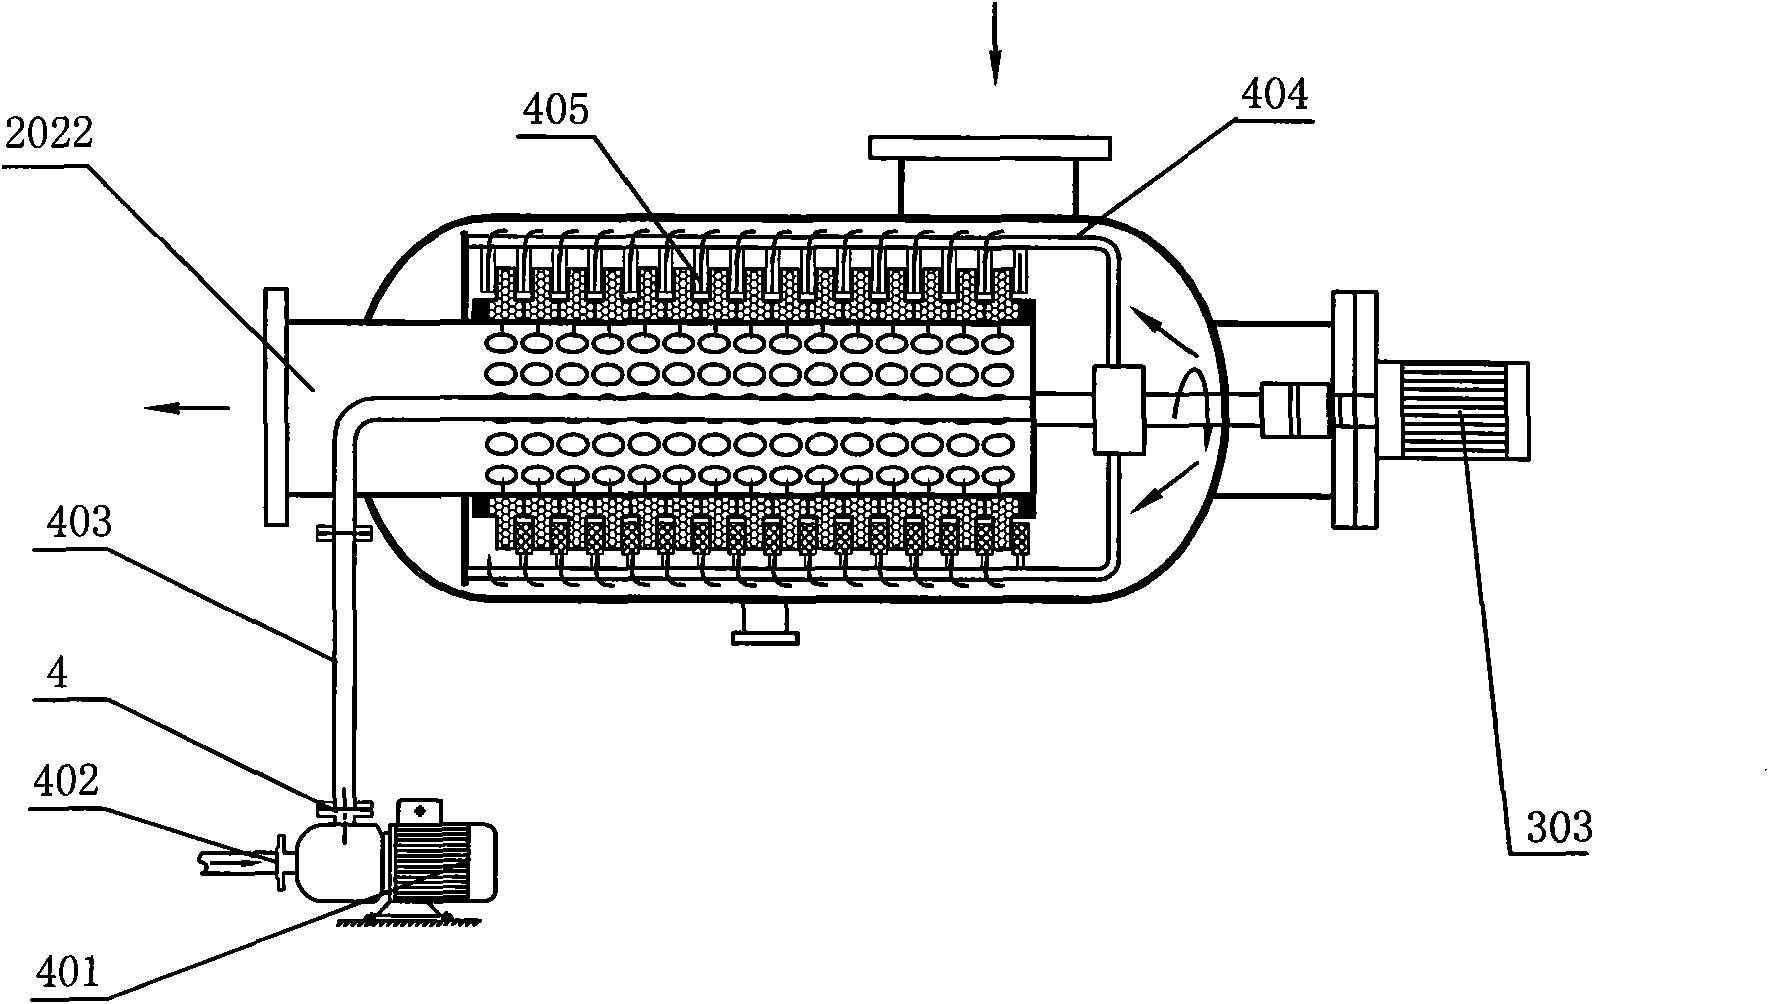 Laminated filter with automatic cleaning device